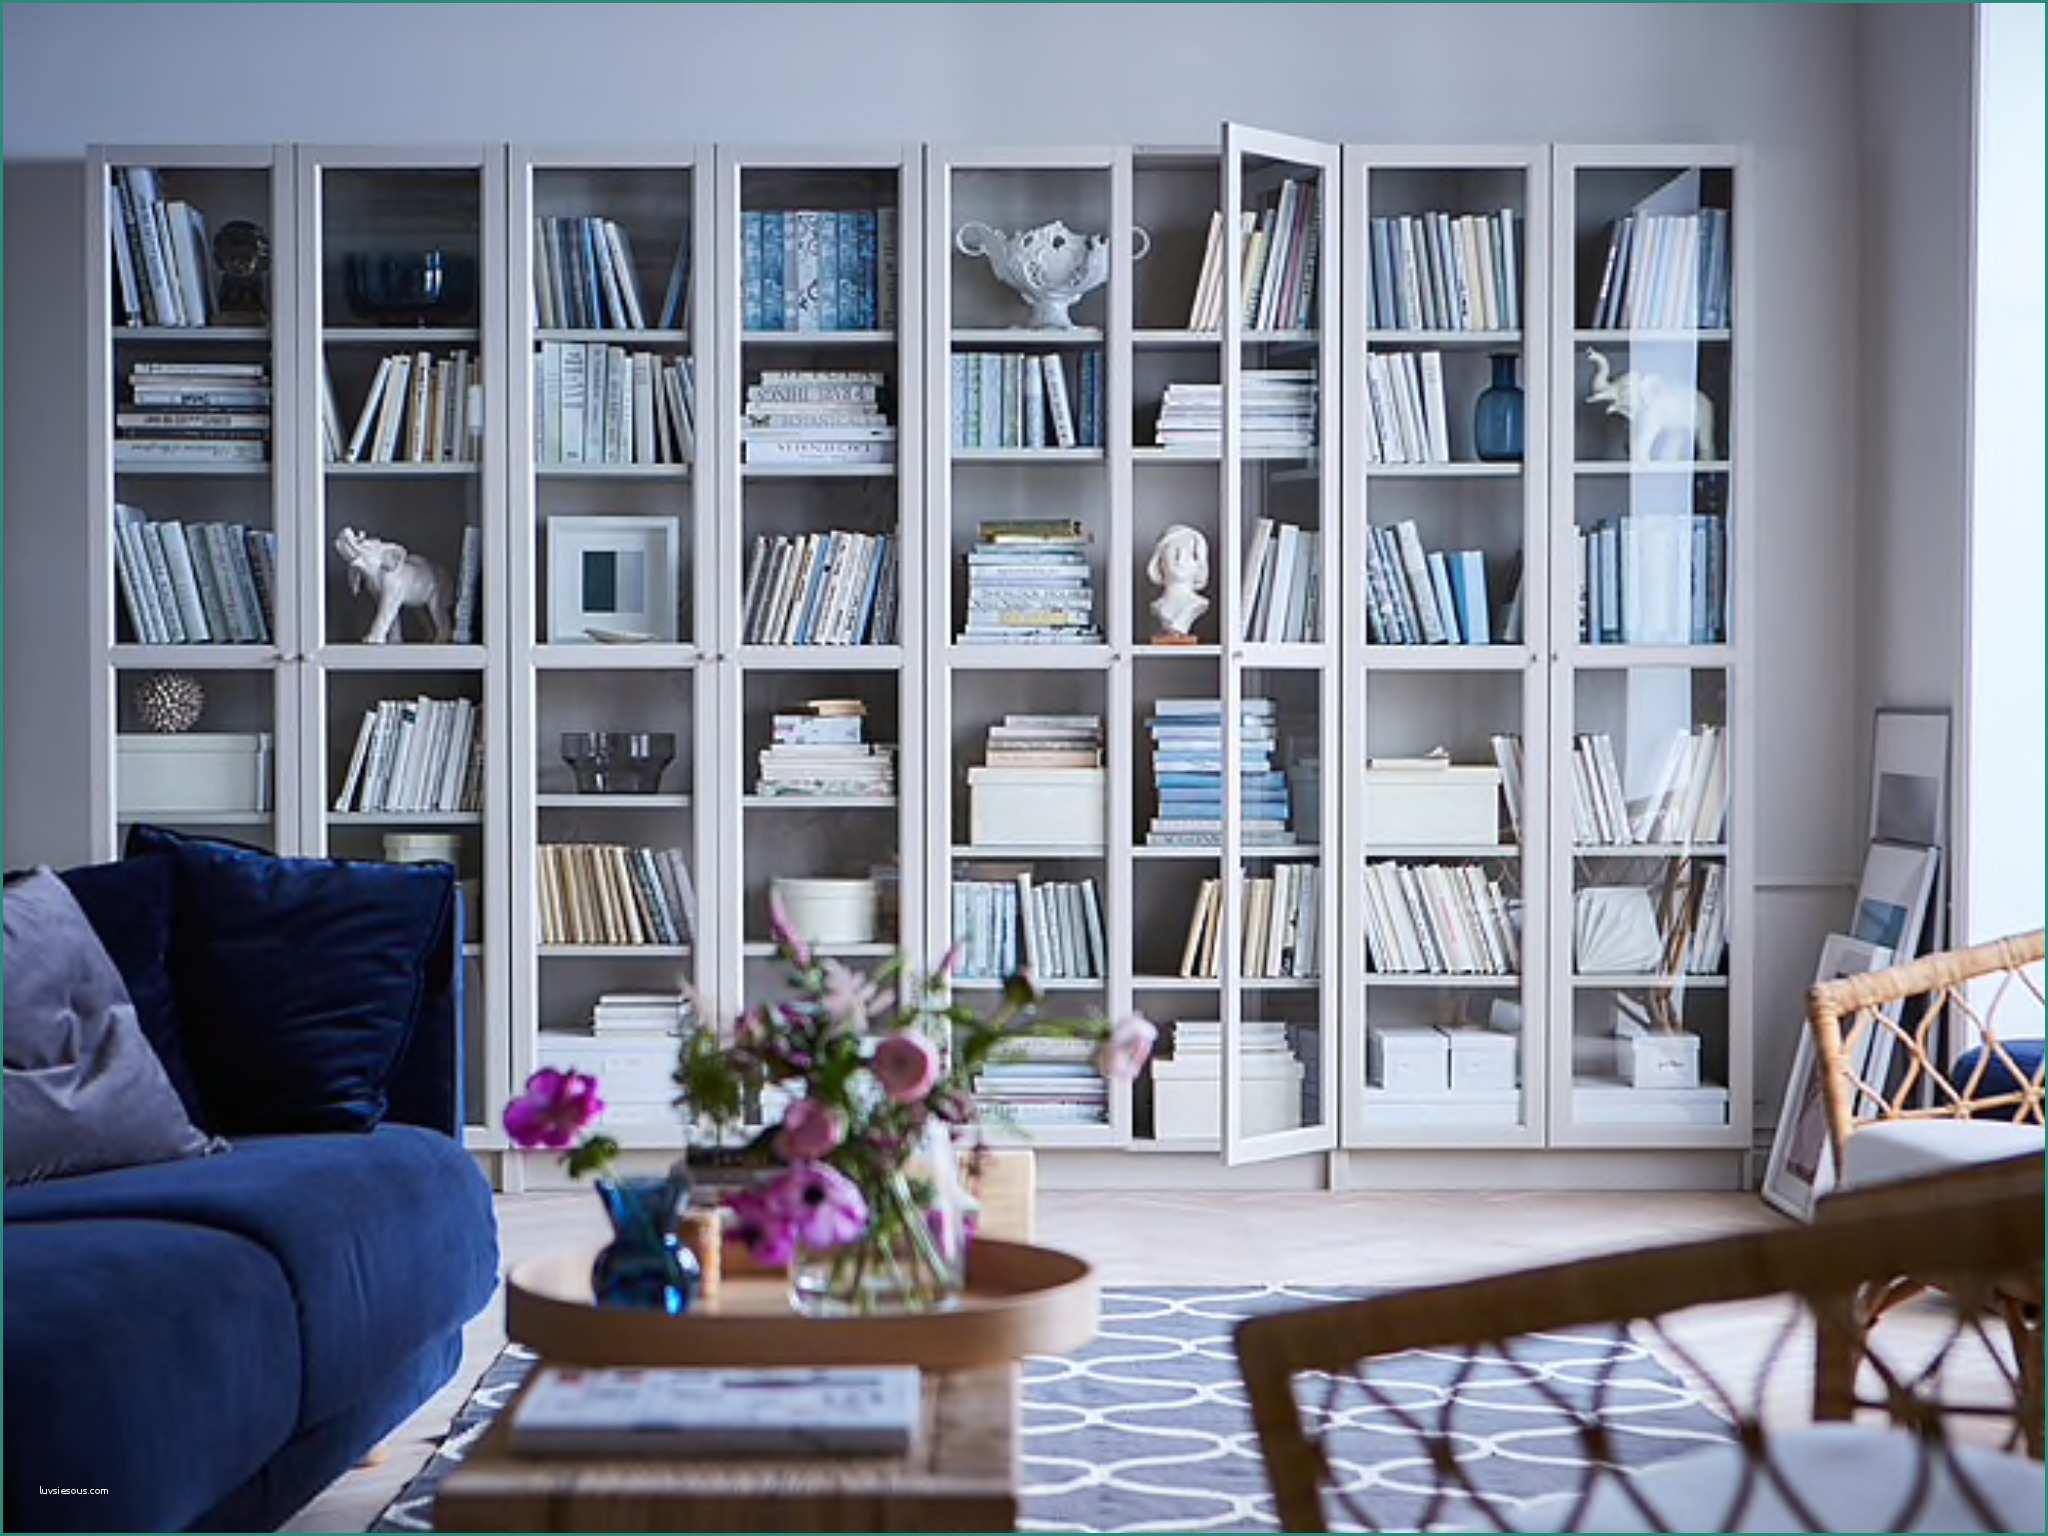 Arredamento Country Chic Ikea E Billy Bookcase with Oxberg Doors From Ikea